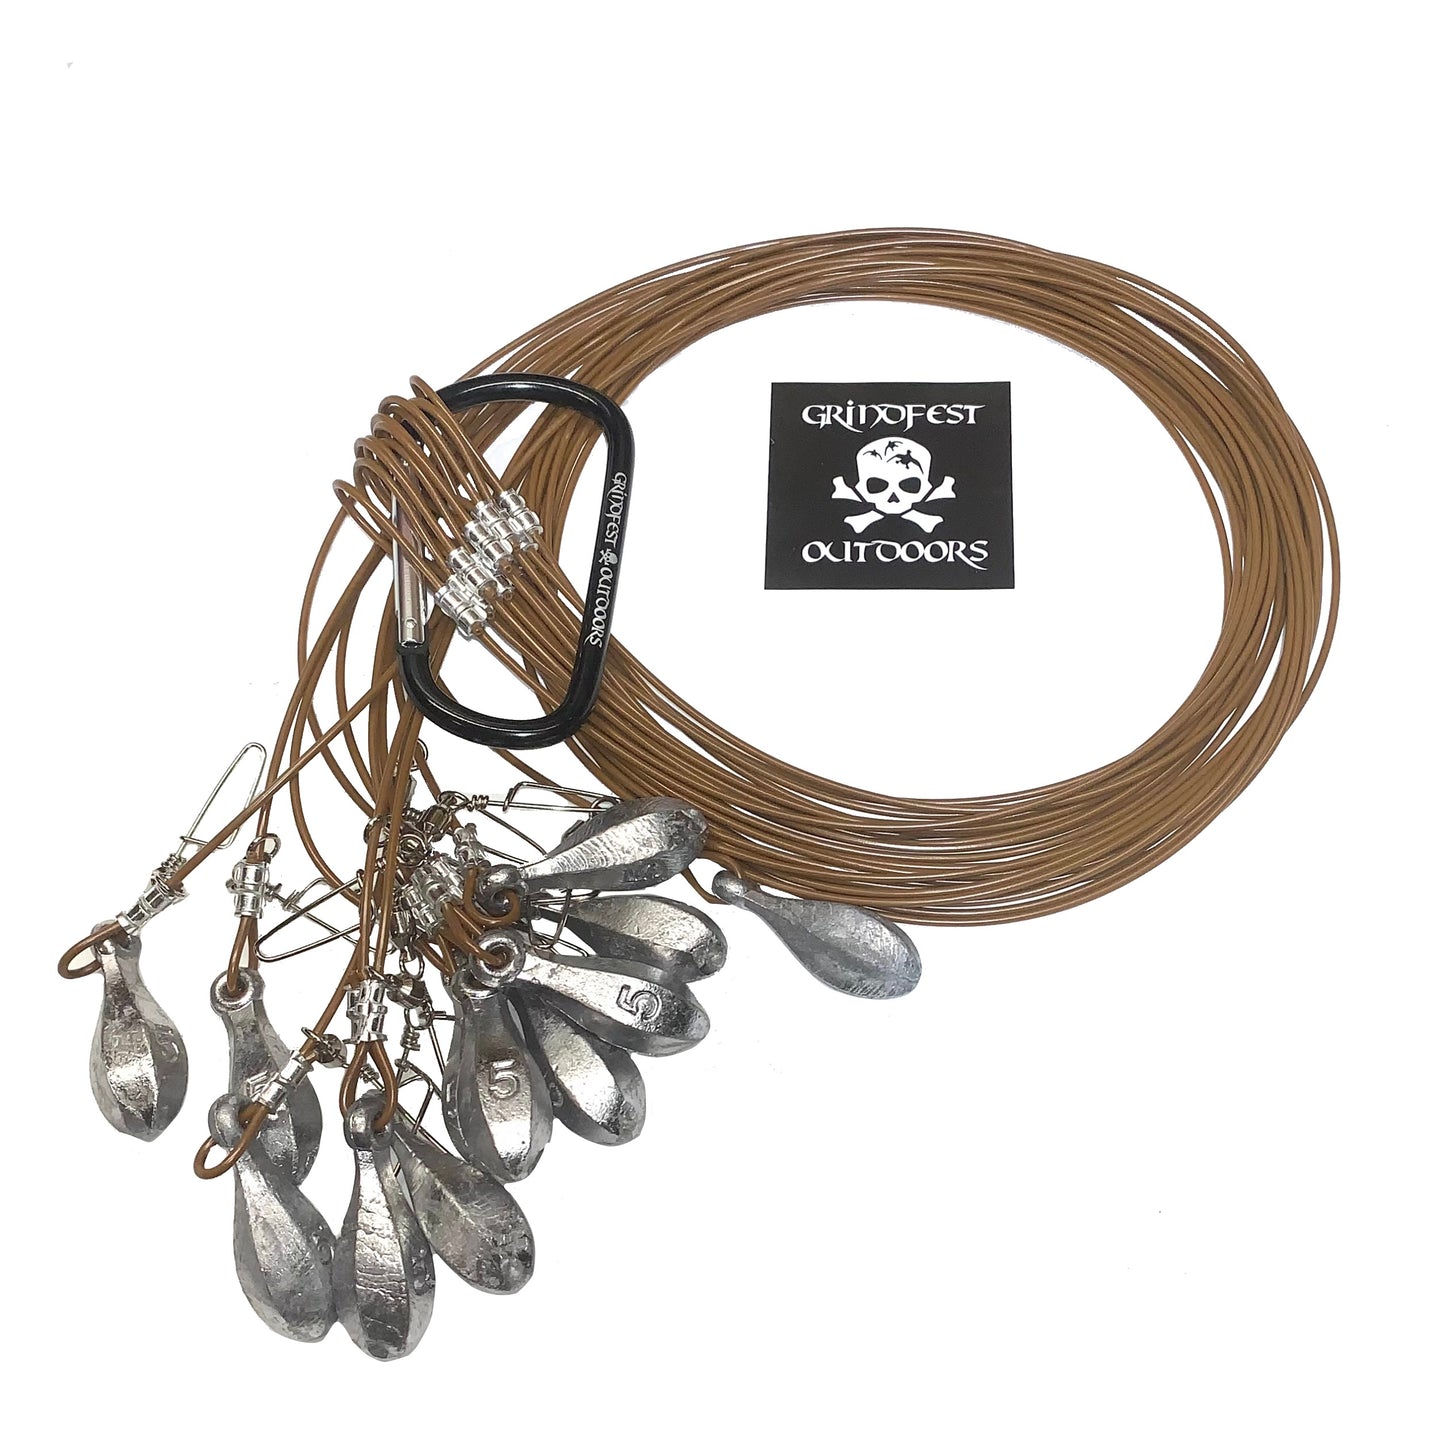 5oz Coated Steel Cable Texas Rigs – GrindFest Outdoors